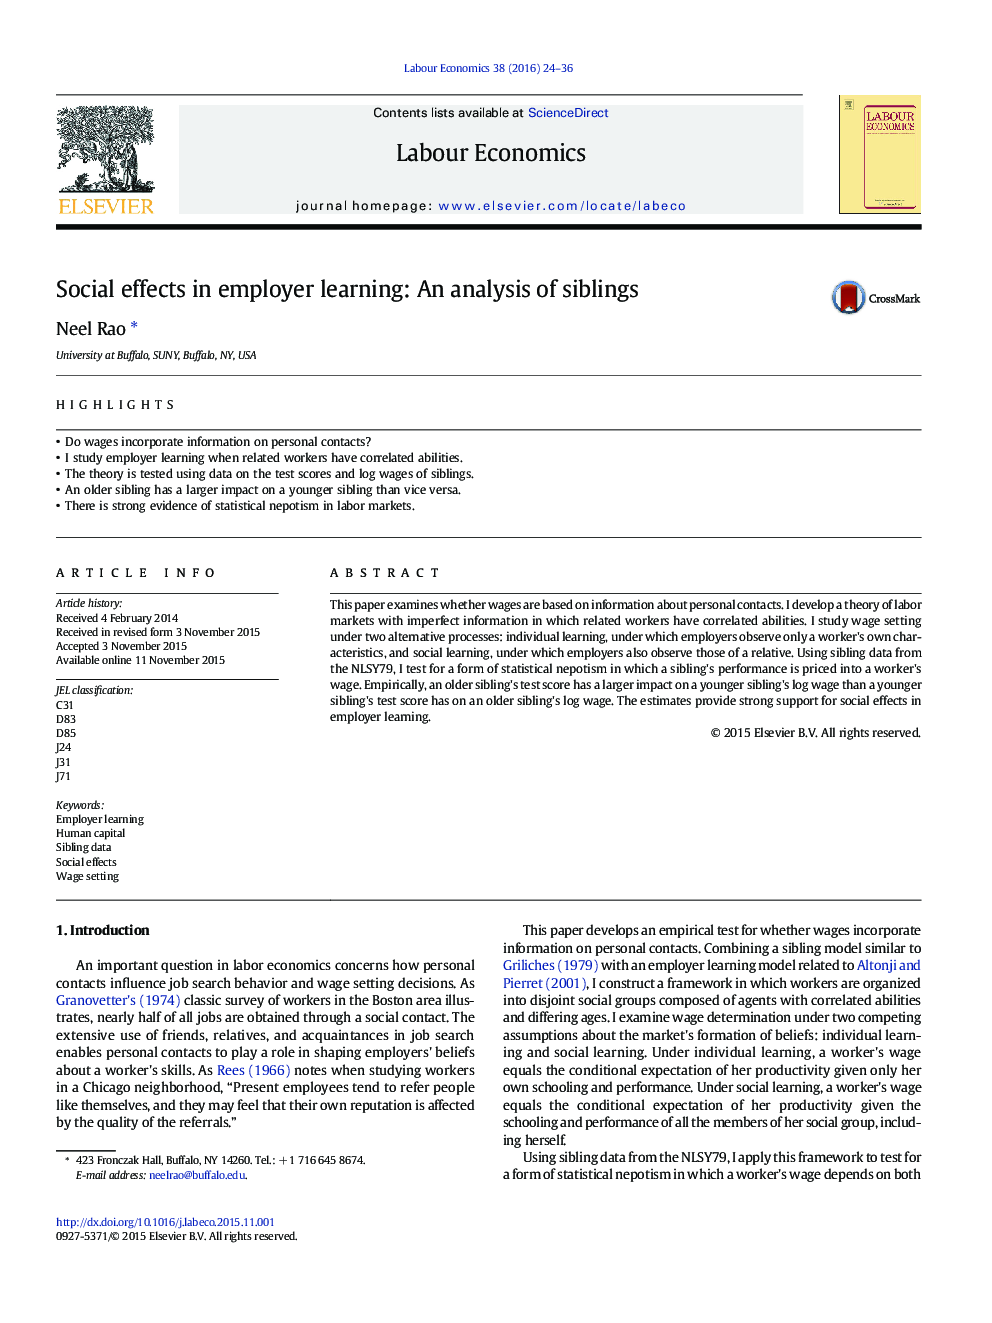 Social effects in employer learning: An analysis of siblings